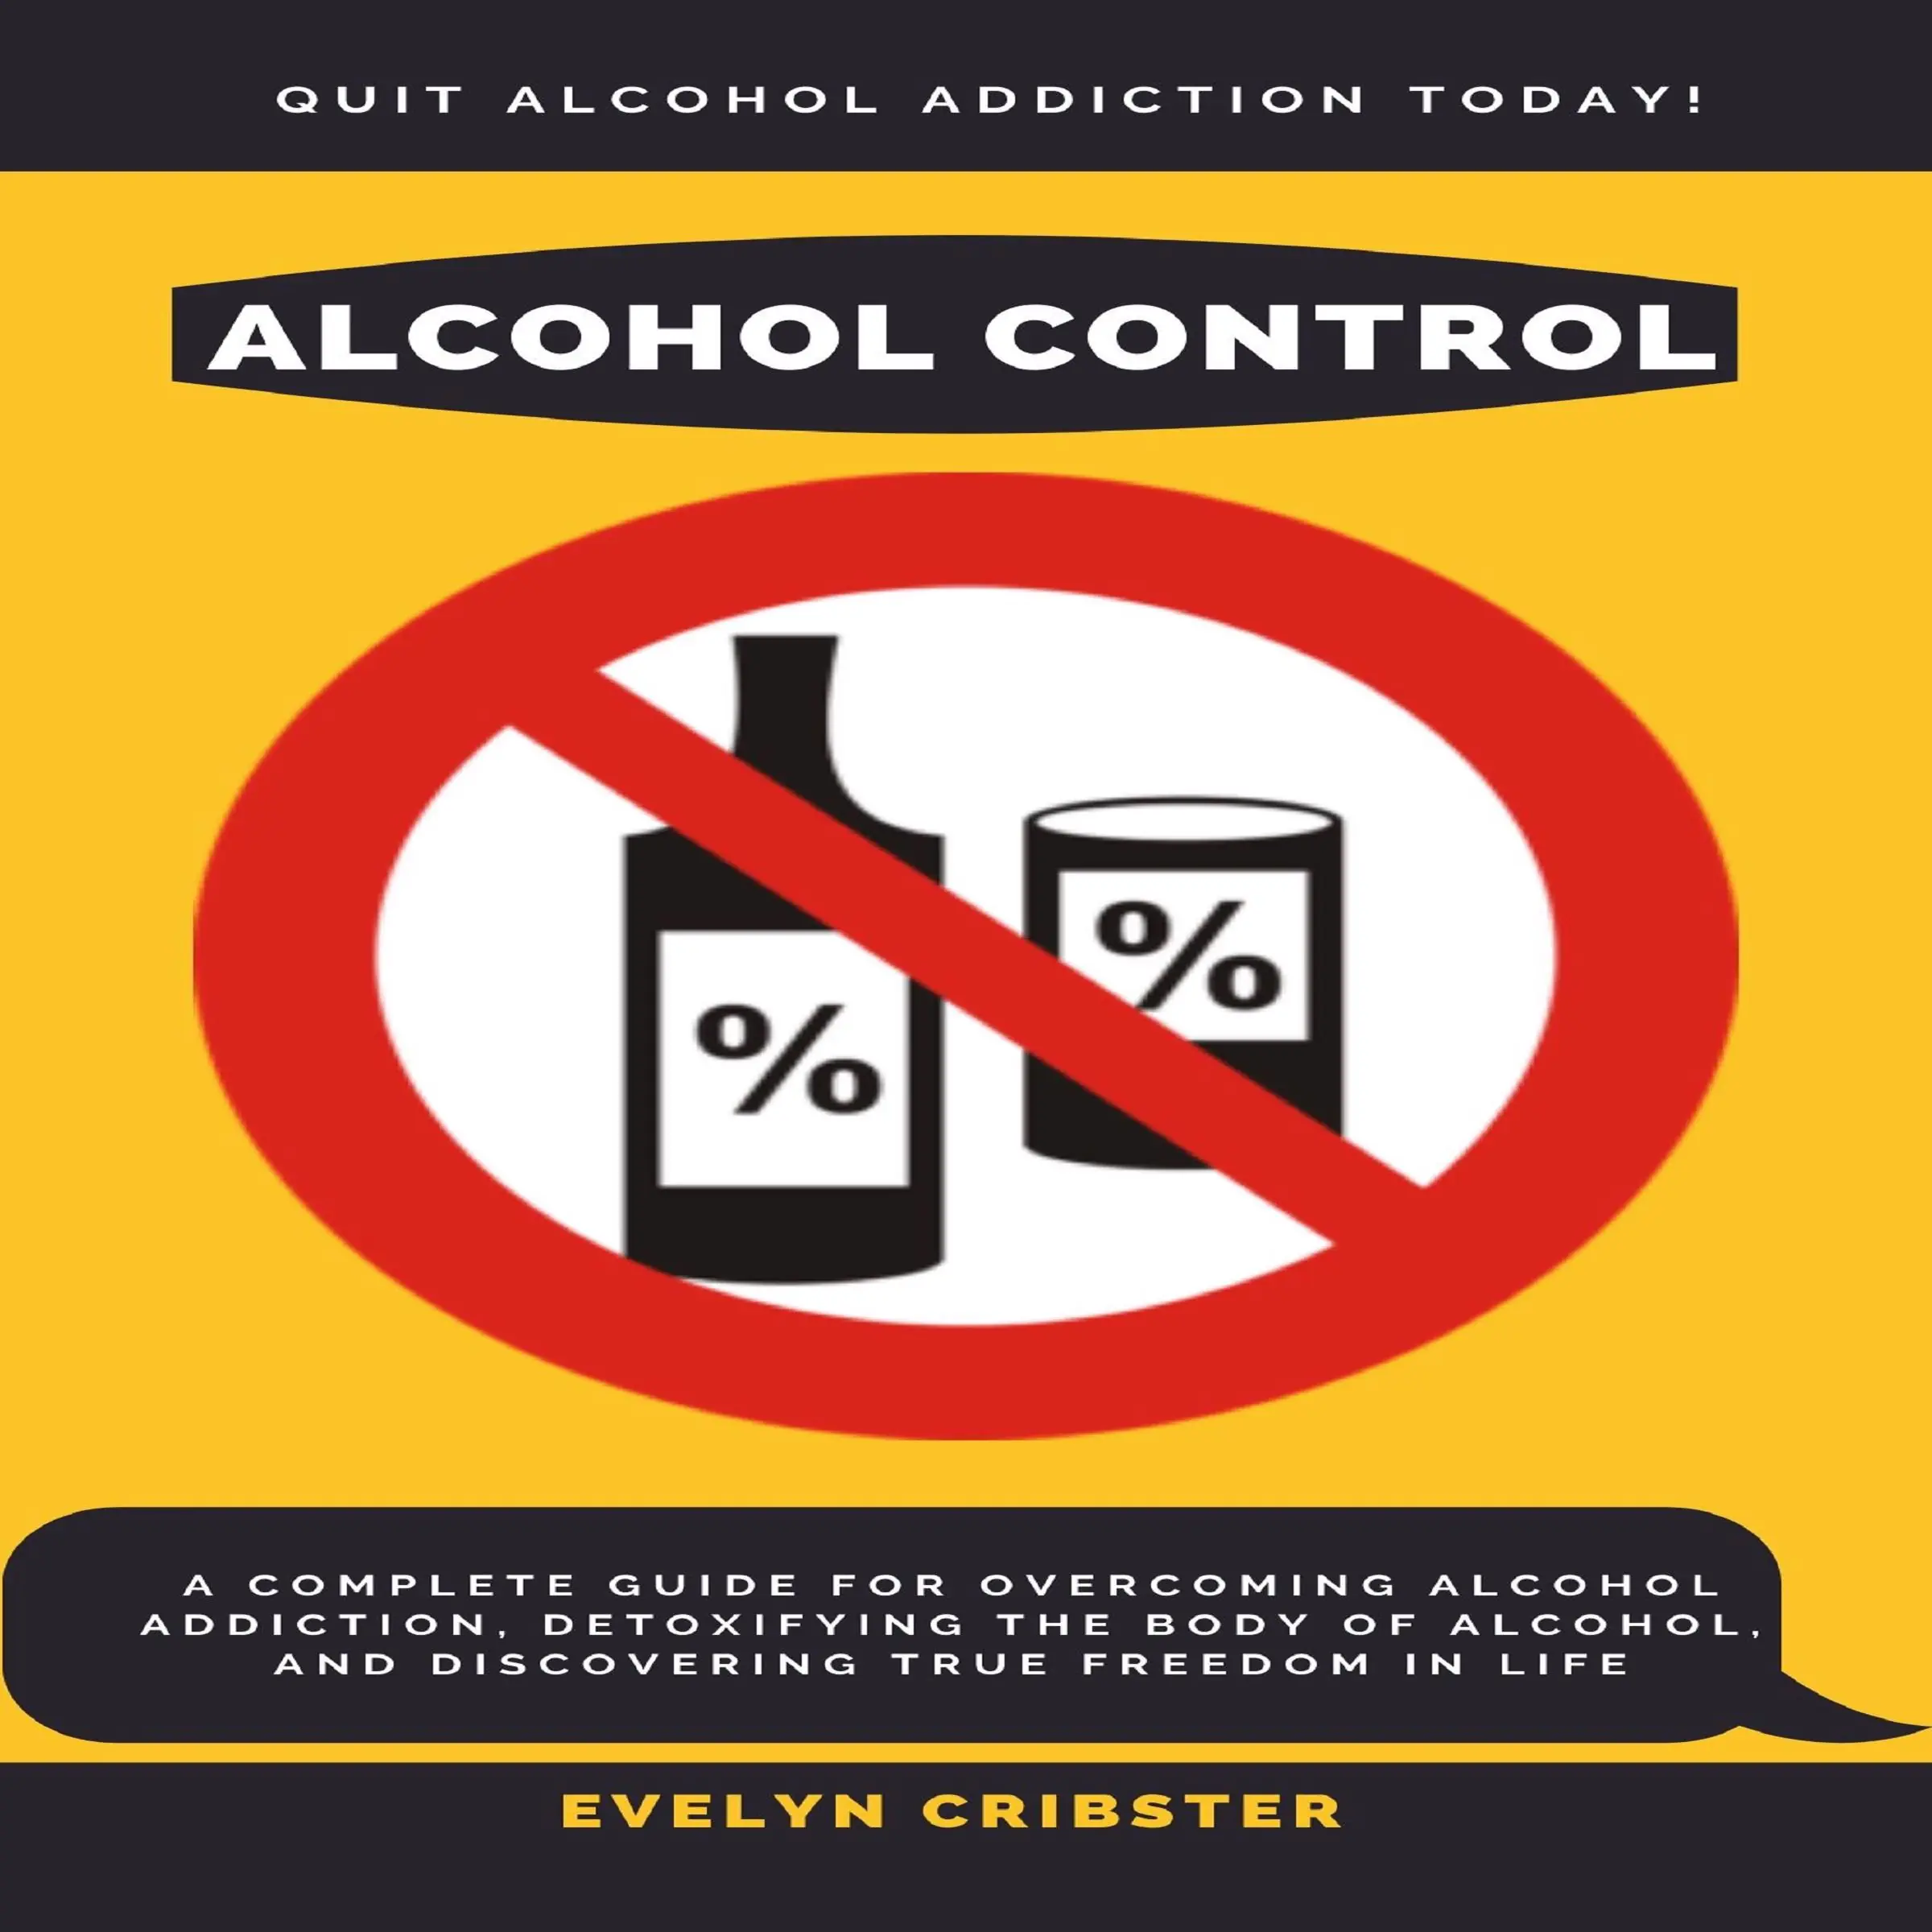 Alcohol Control: A Complete Guide For Overcoming Alcohol Addiction, Detoxifying the Body of Alcohol, and Discovering True Freedom in Life Audiobook by Evelyn Cribster